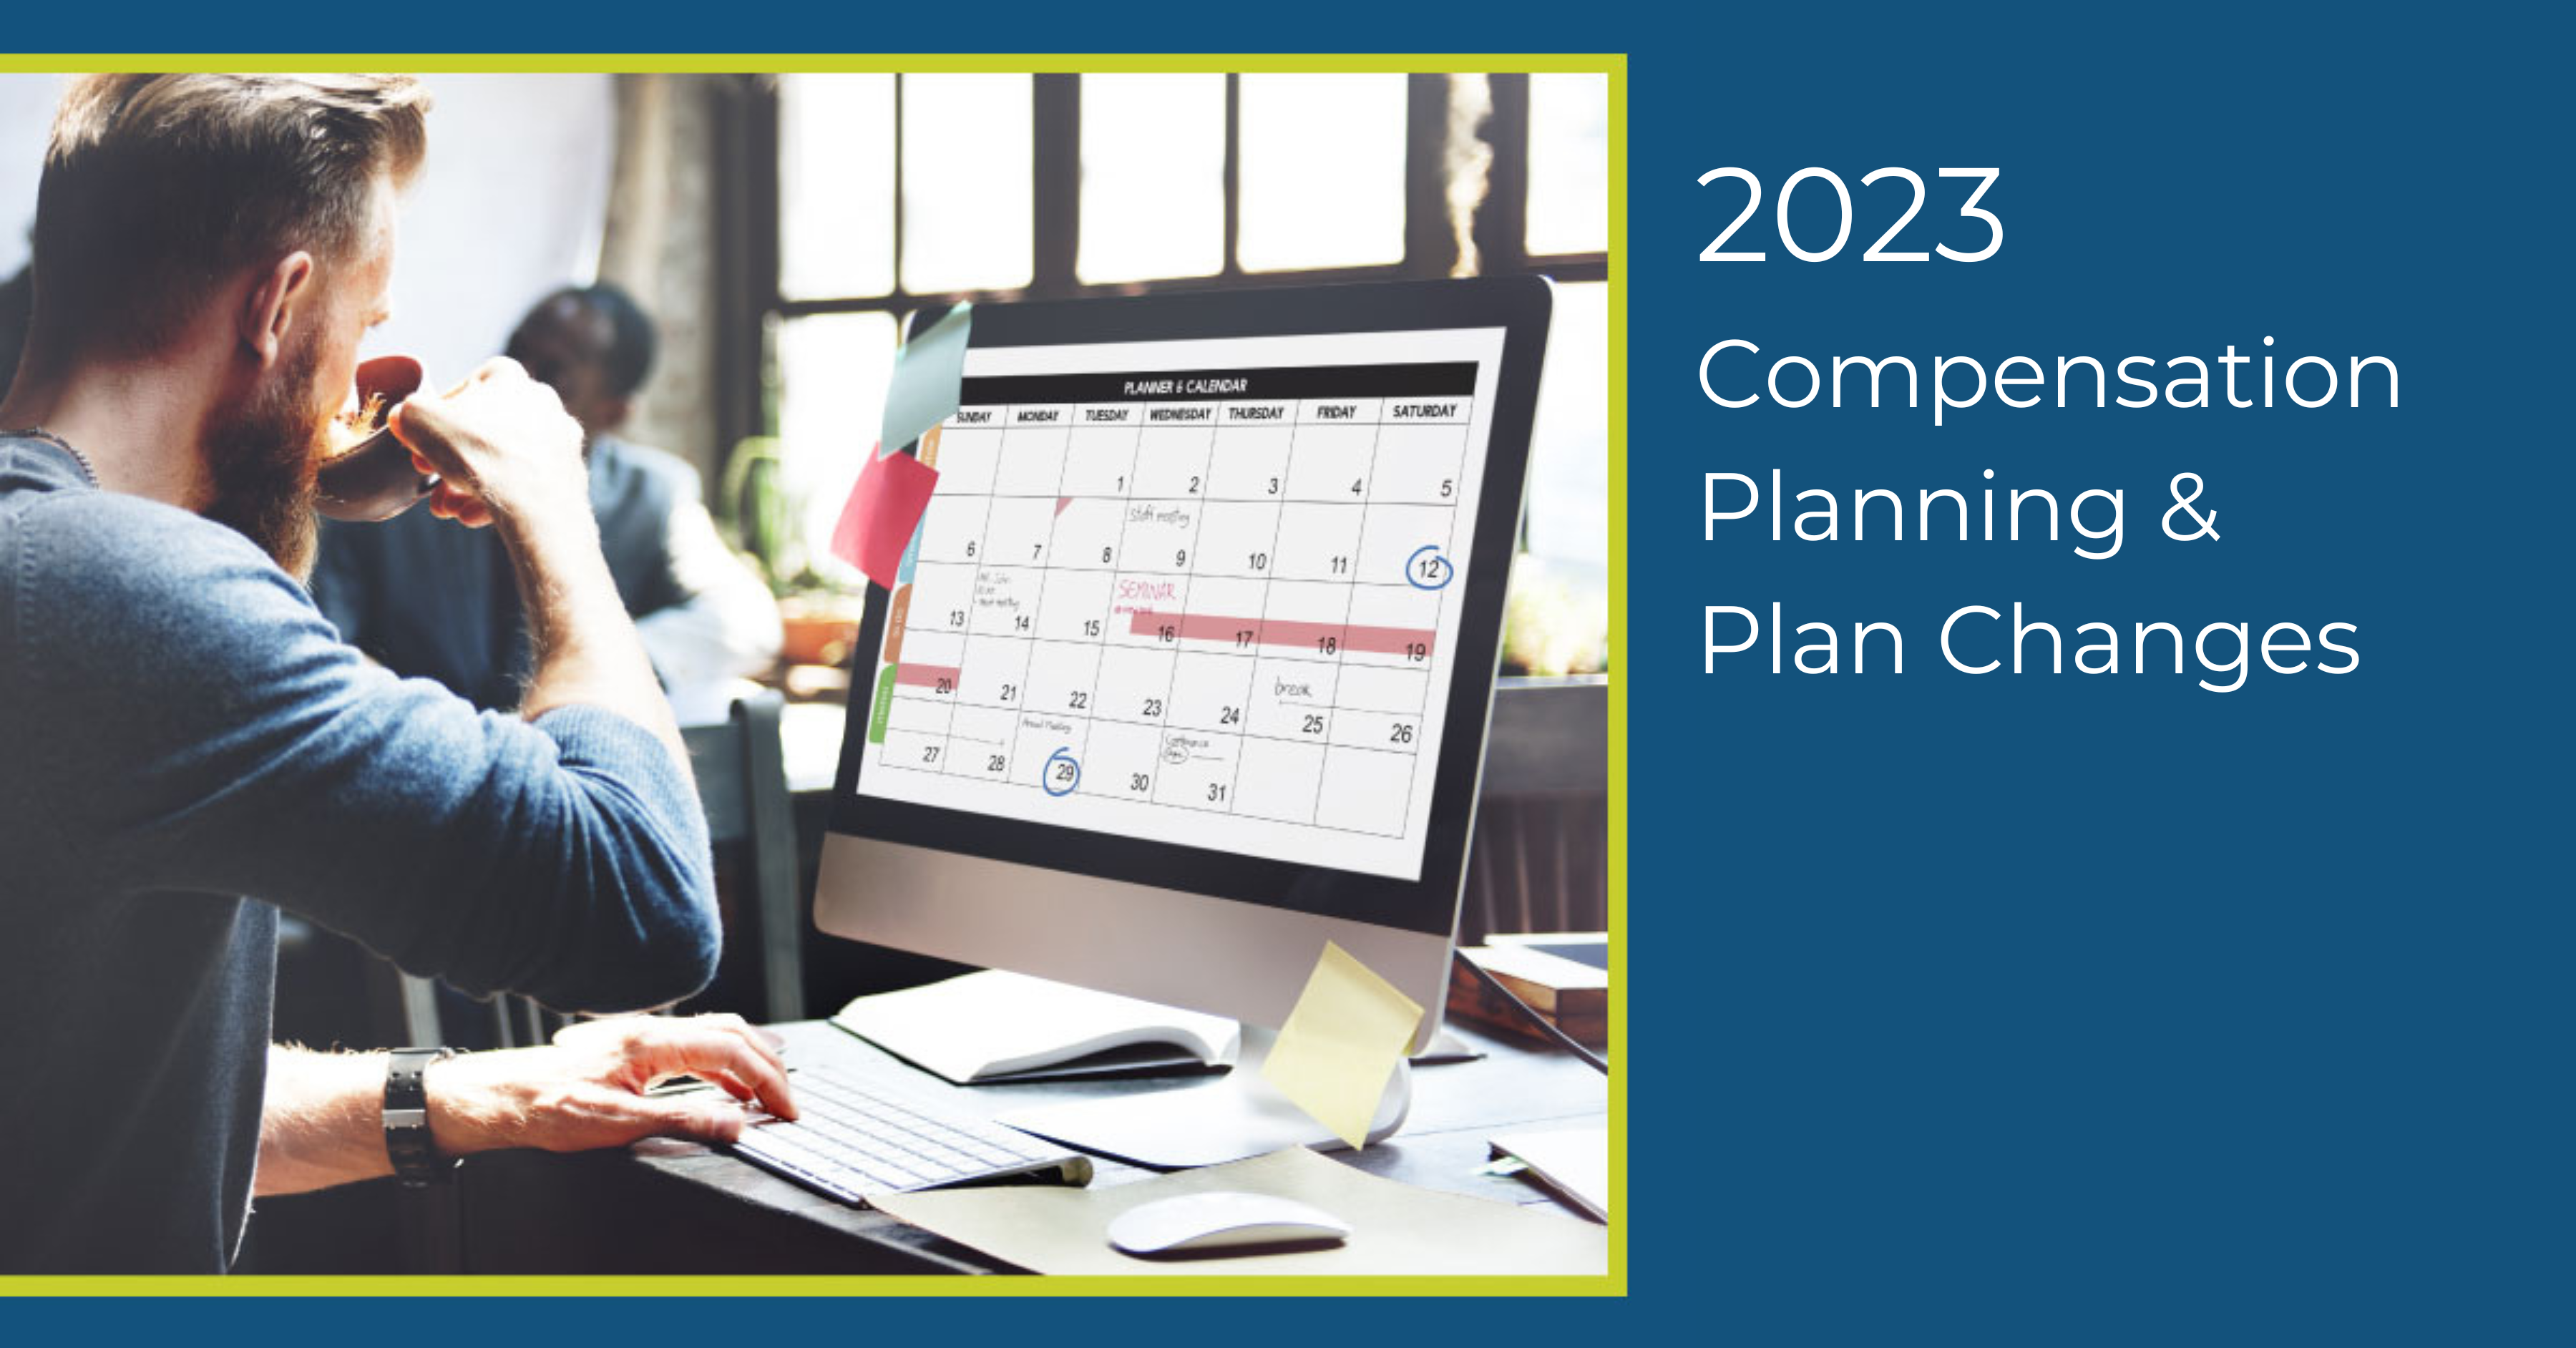 5 Things to Consider When Designing Your 2023 Comp Plans